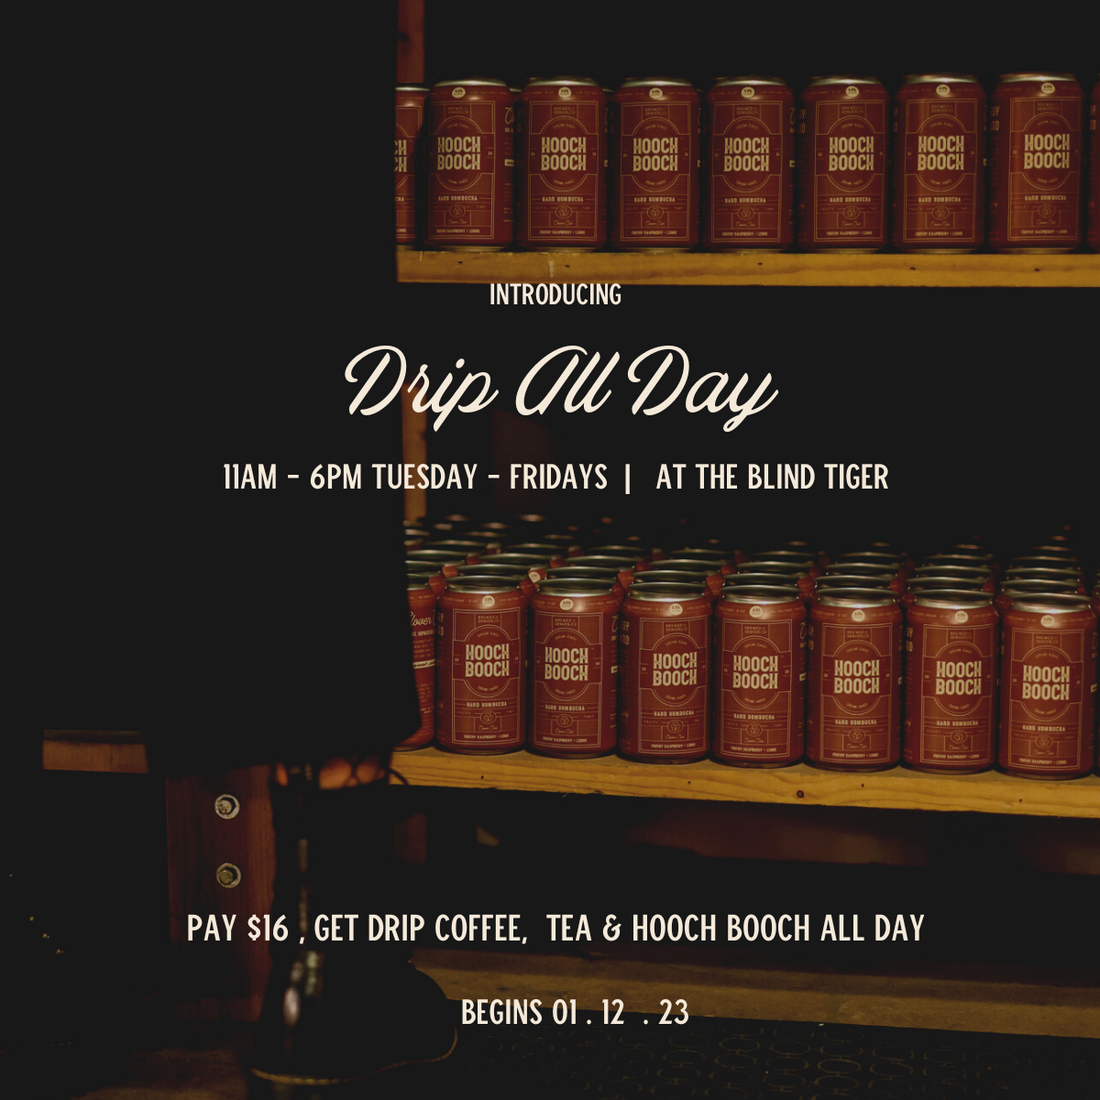 Drip All Day: Every Tuesday - Friday